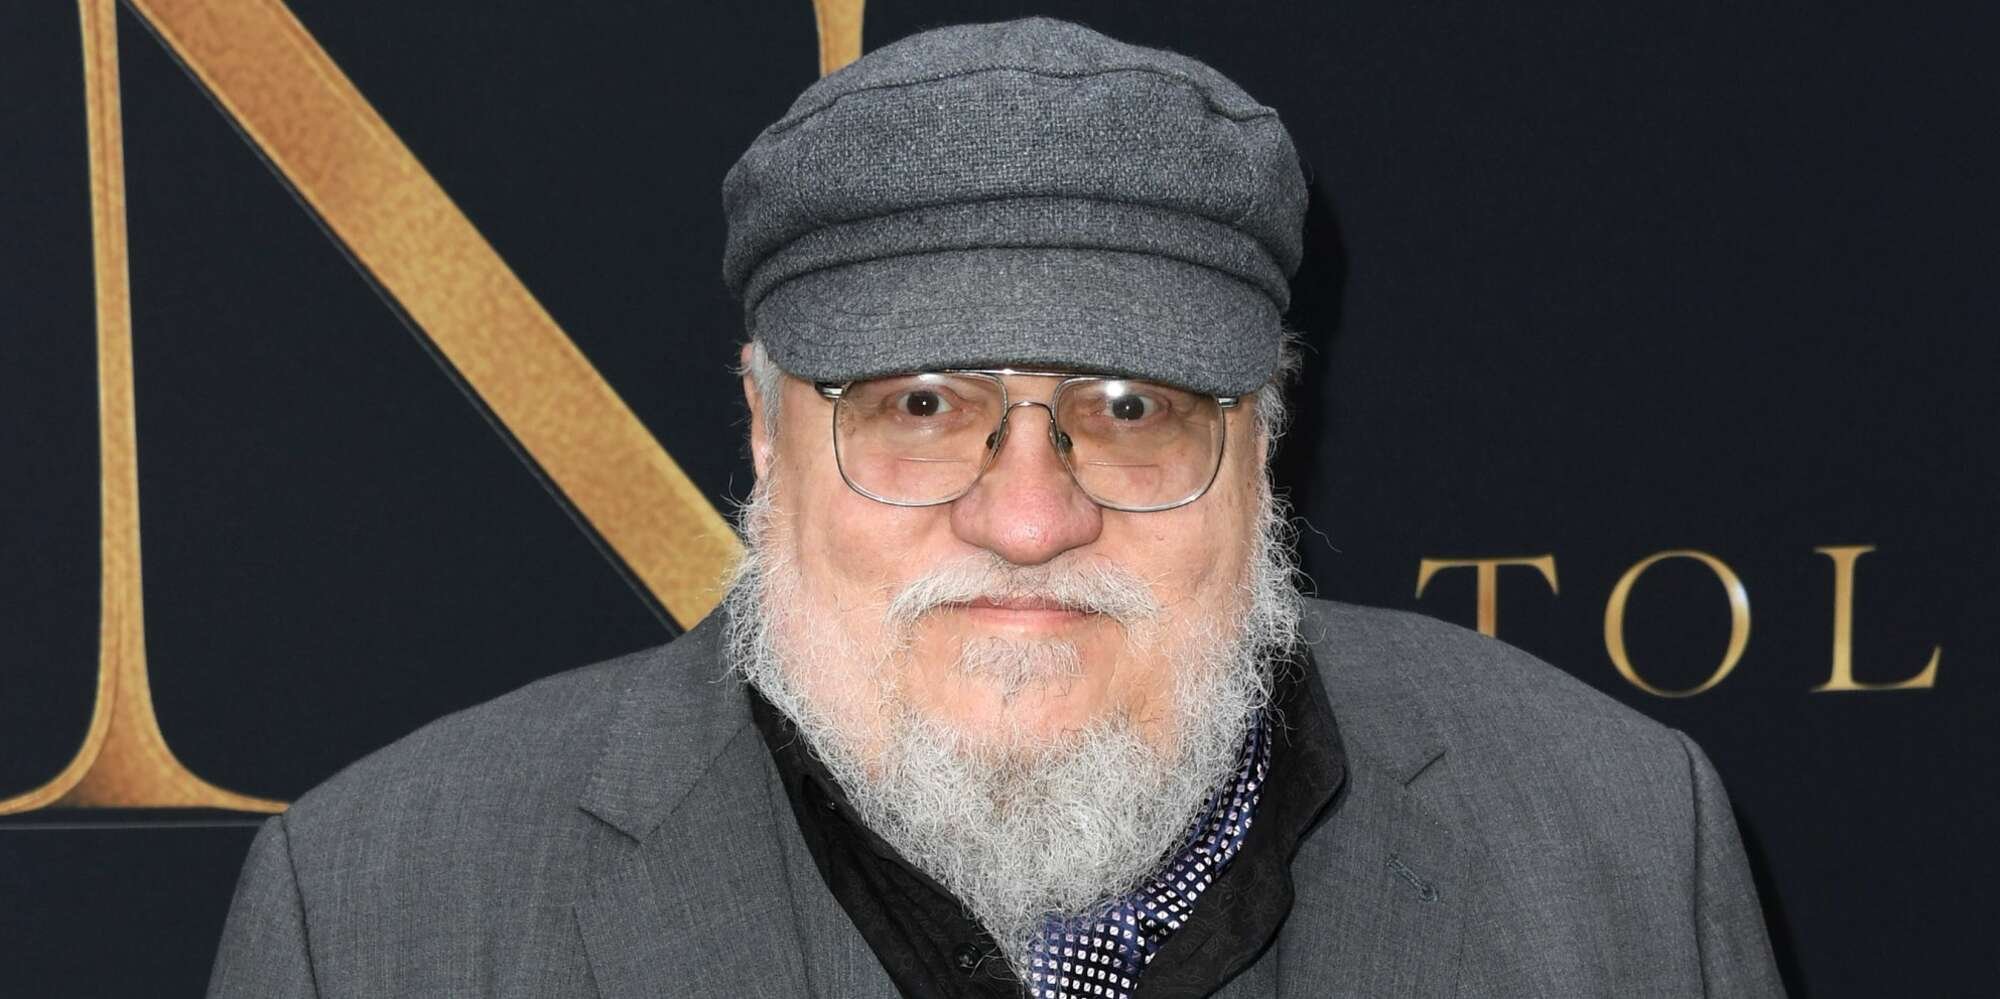 George R. R. Martin says Westeros isn't any more 'anti-woman' than real-life history